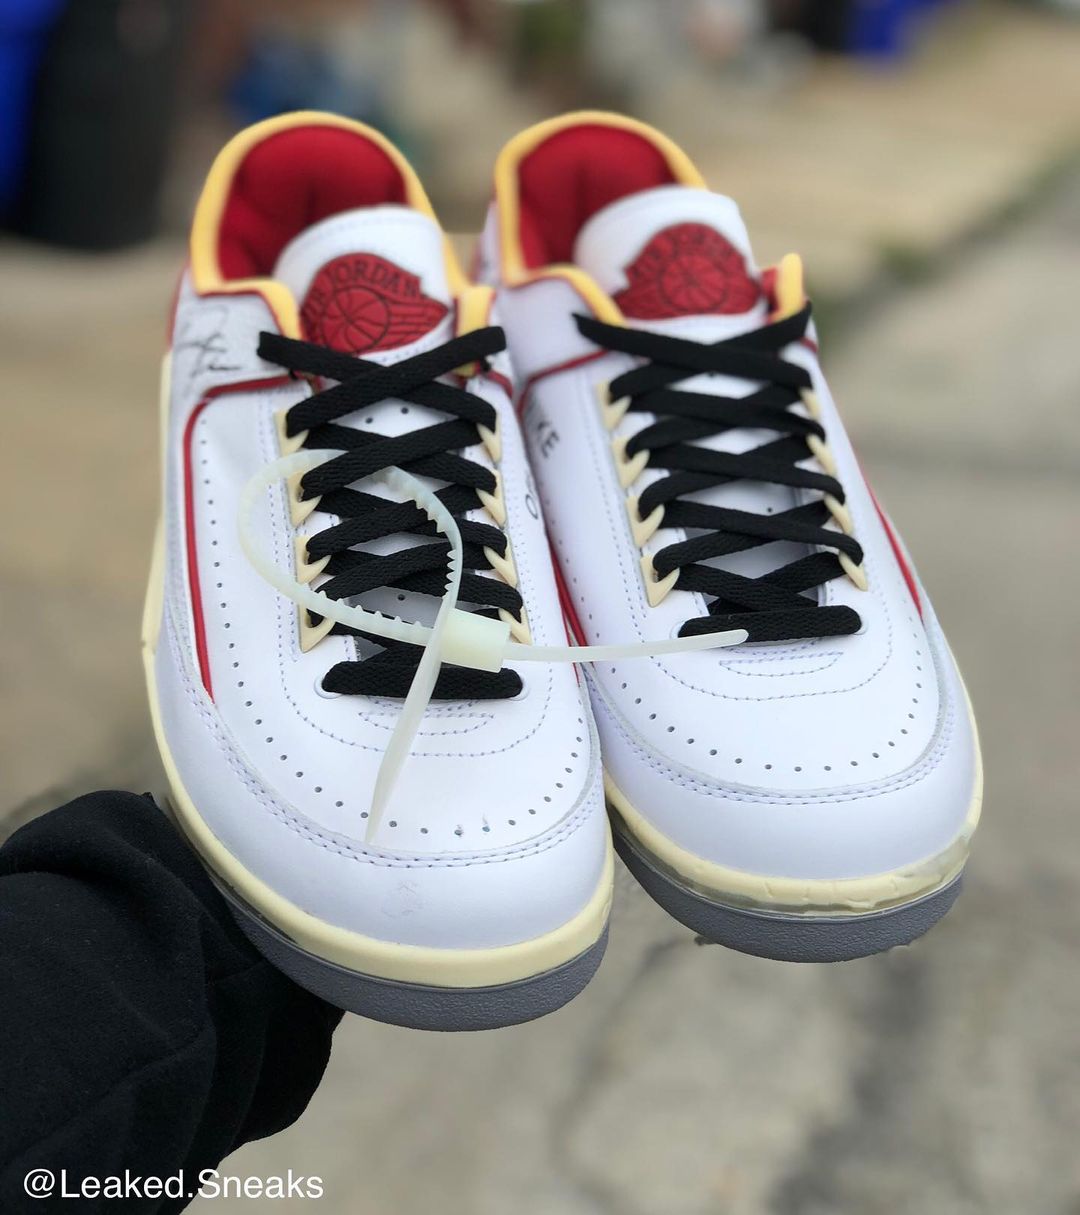 Off-White x Air Jordan 2 Low Slated to Drop in September